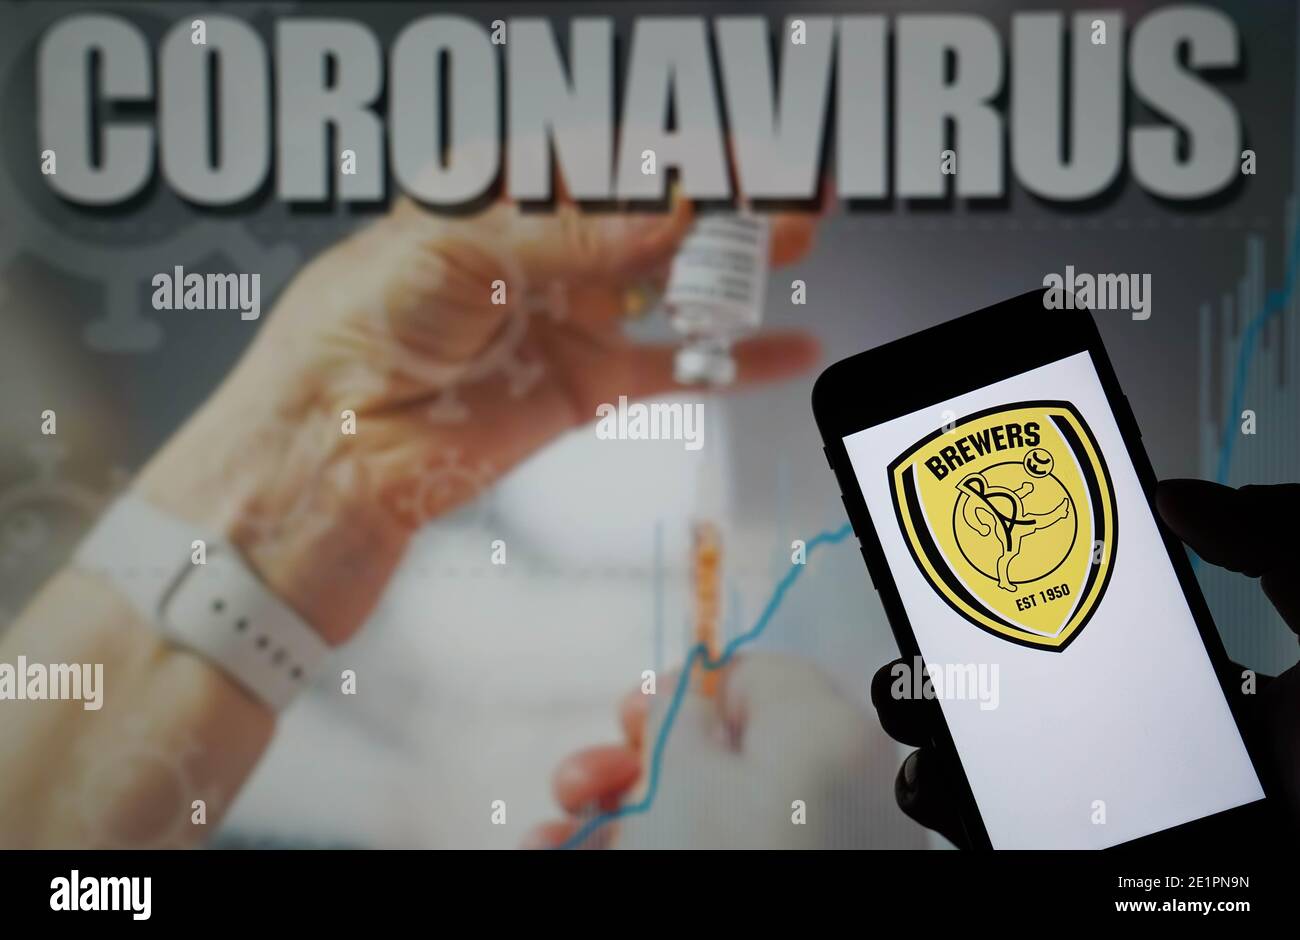 The Burton Albion Football Club logo seen displayed on a mobile phone with a Coronavirus illustration on a monitor in the background Stock Photo